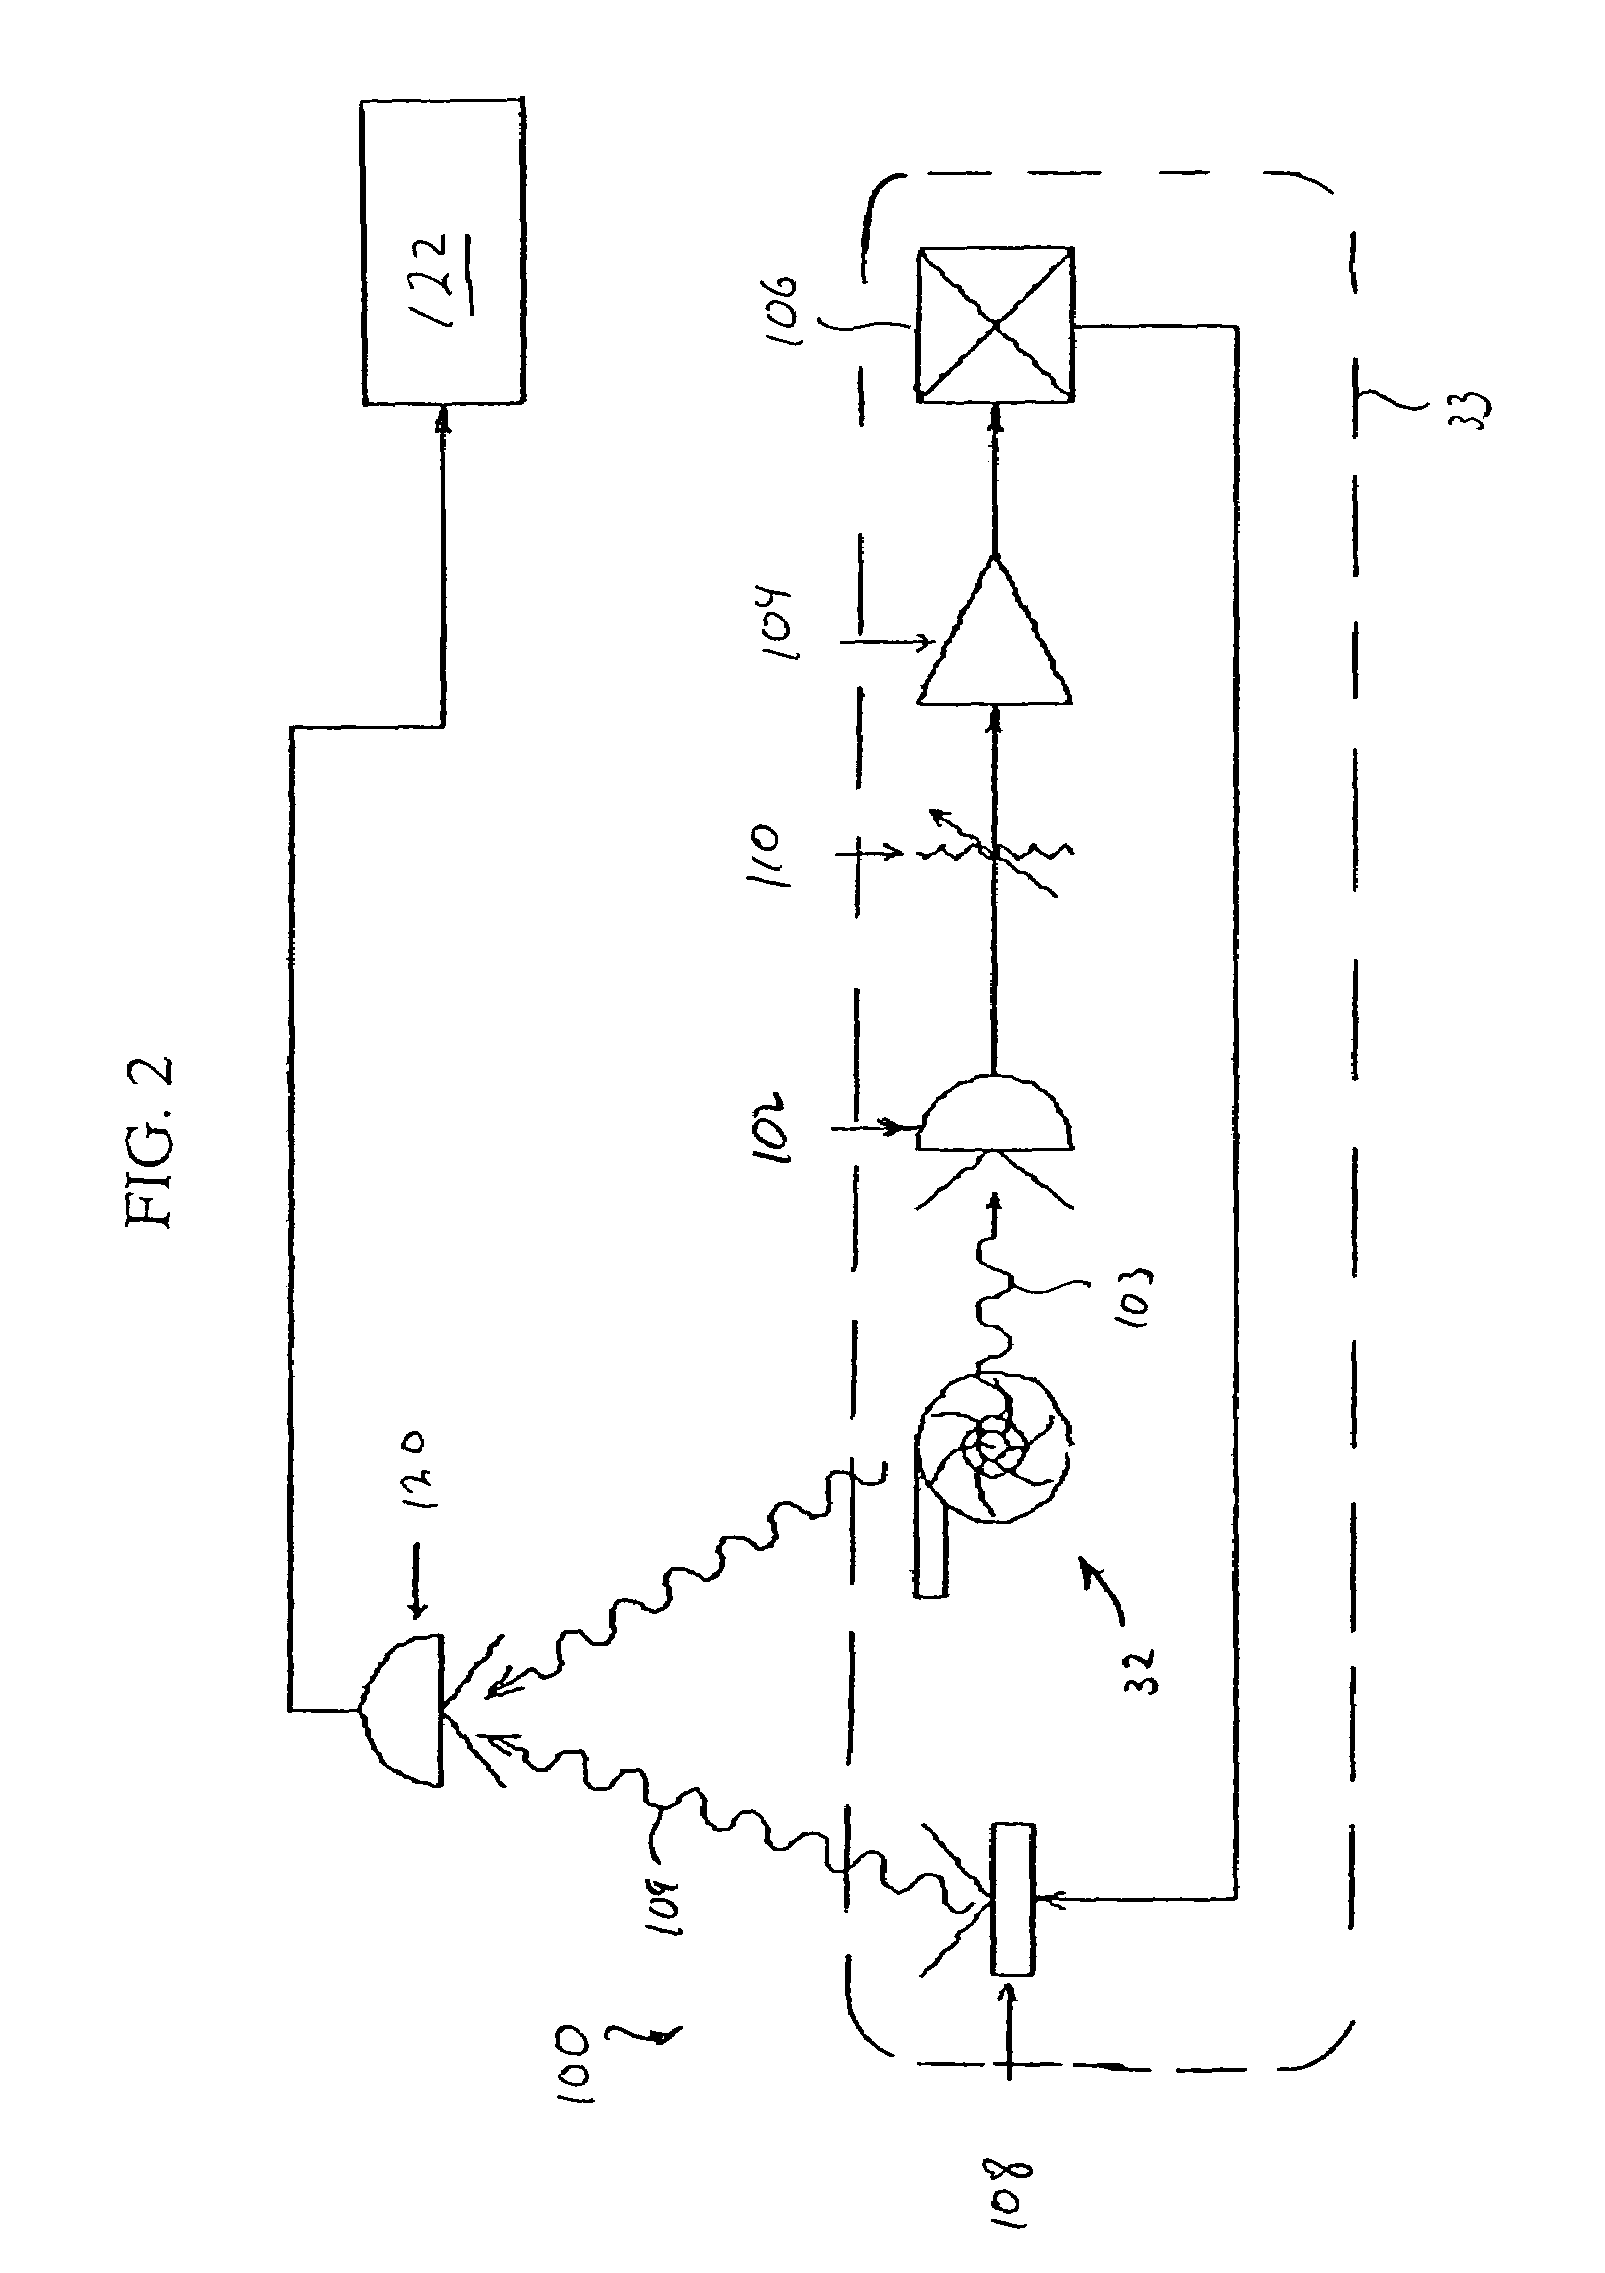 Pressure support system with active noise cancellation